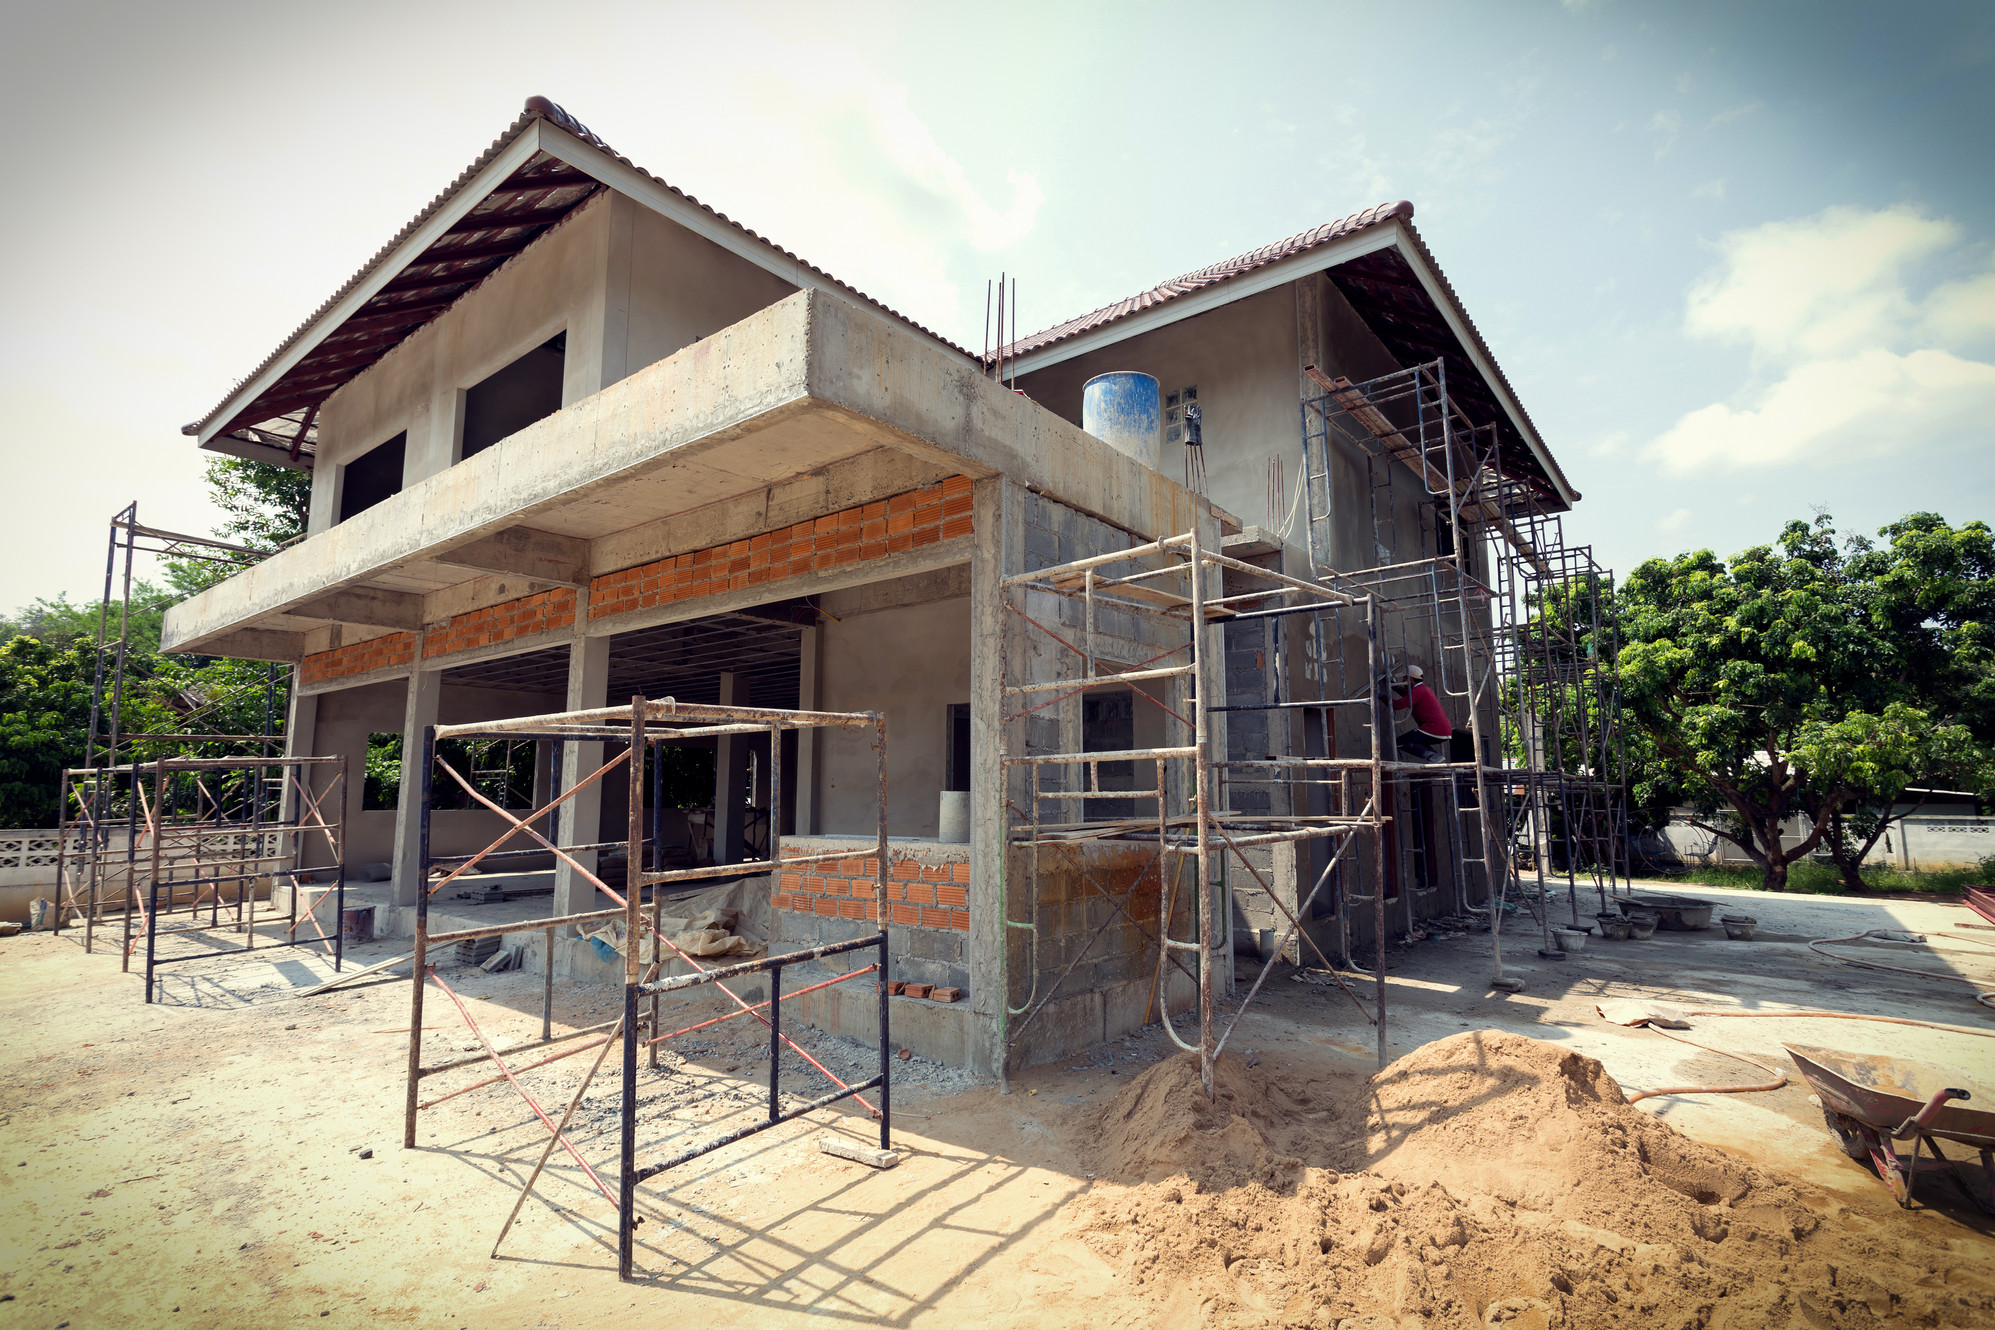 How Much Does It Cost to Build a House in the Philippines?